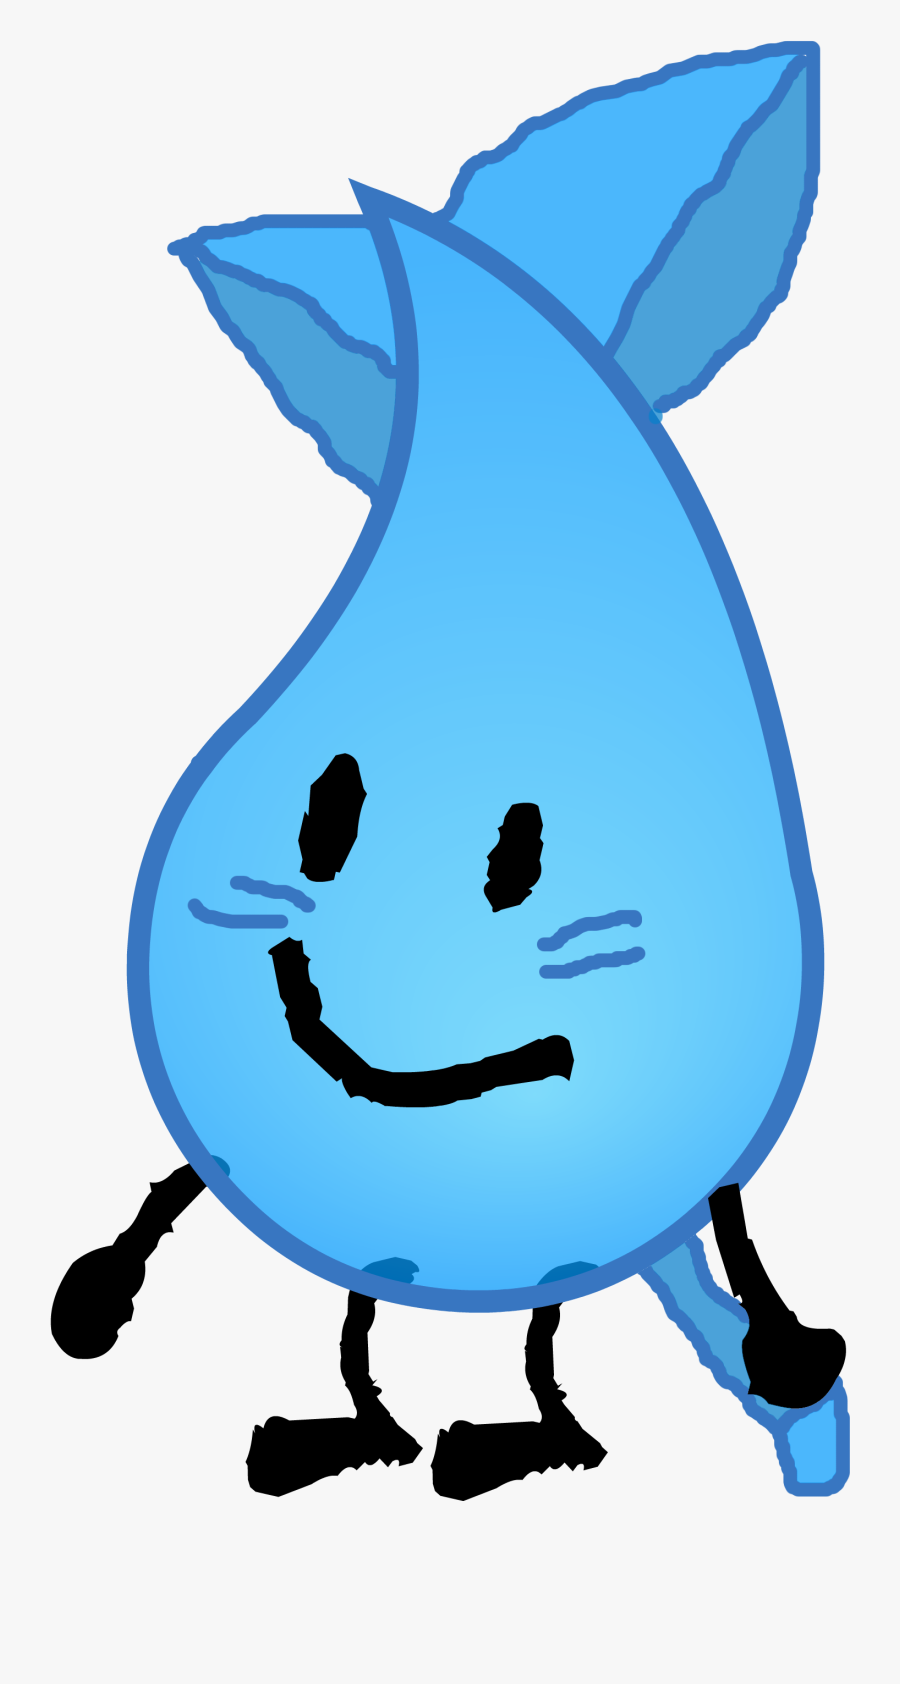 Bfb Teardrop Clipart , Png Download - Bfb Teardrop, Transparent Clipart